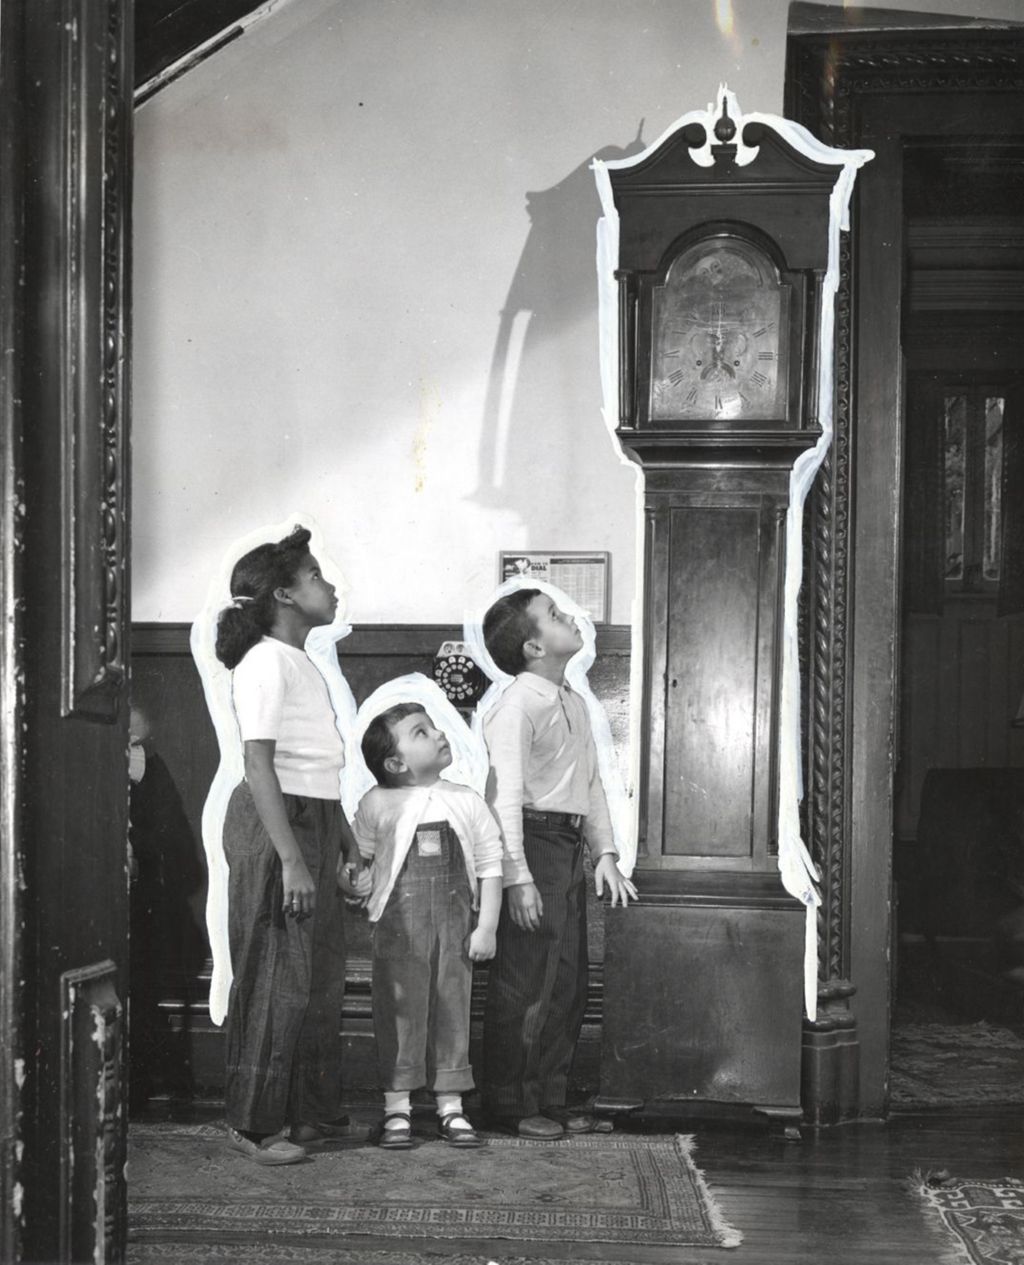 Miniature of Three children looking up at grandfather clock